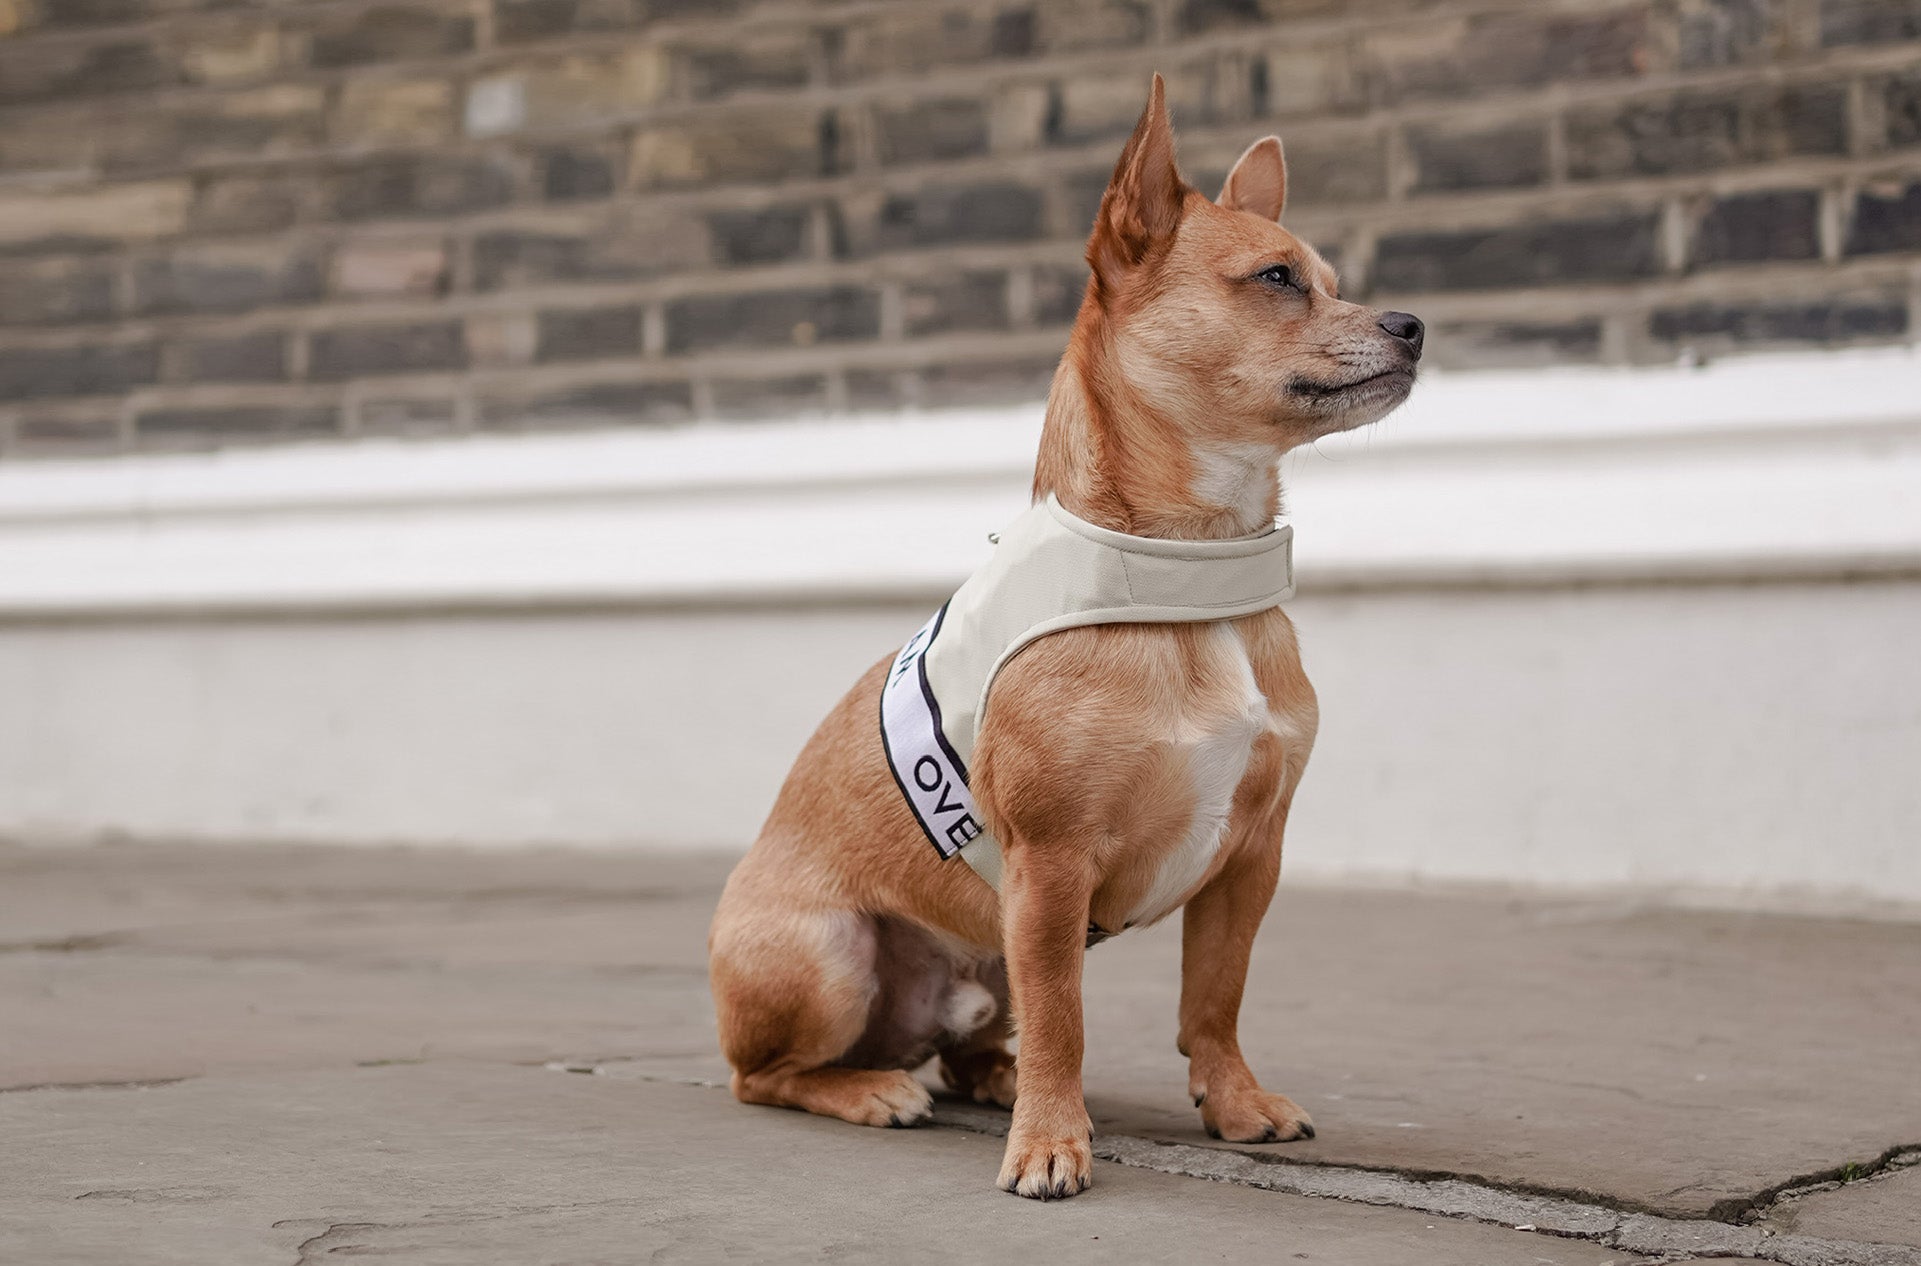 A dog posing with an Over Glam Harness in the street